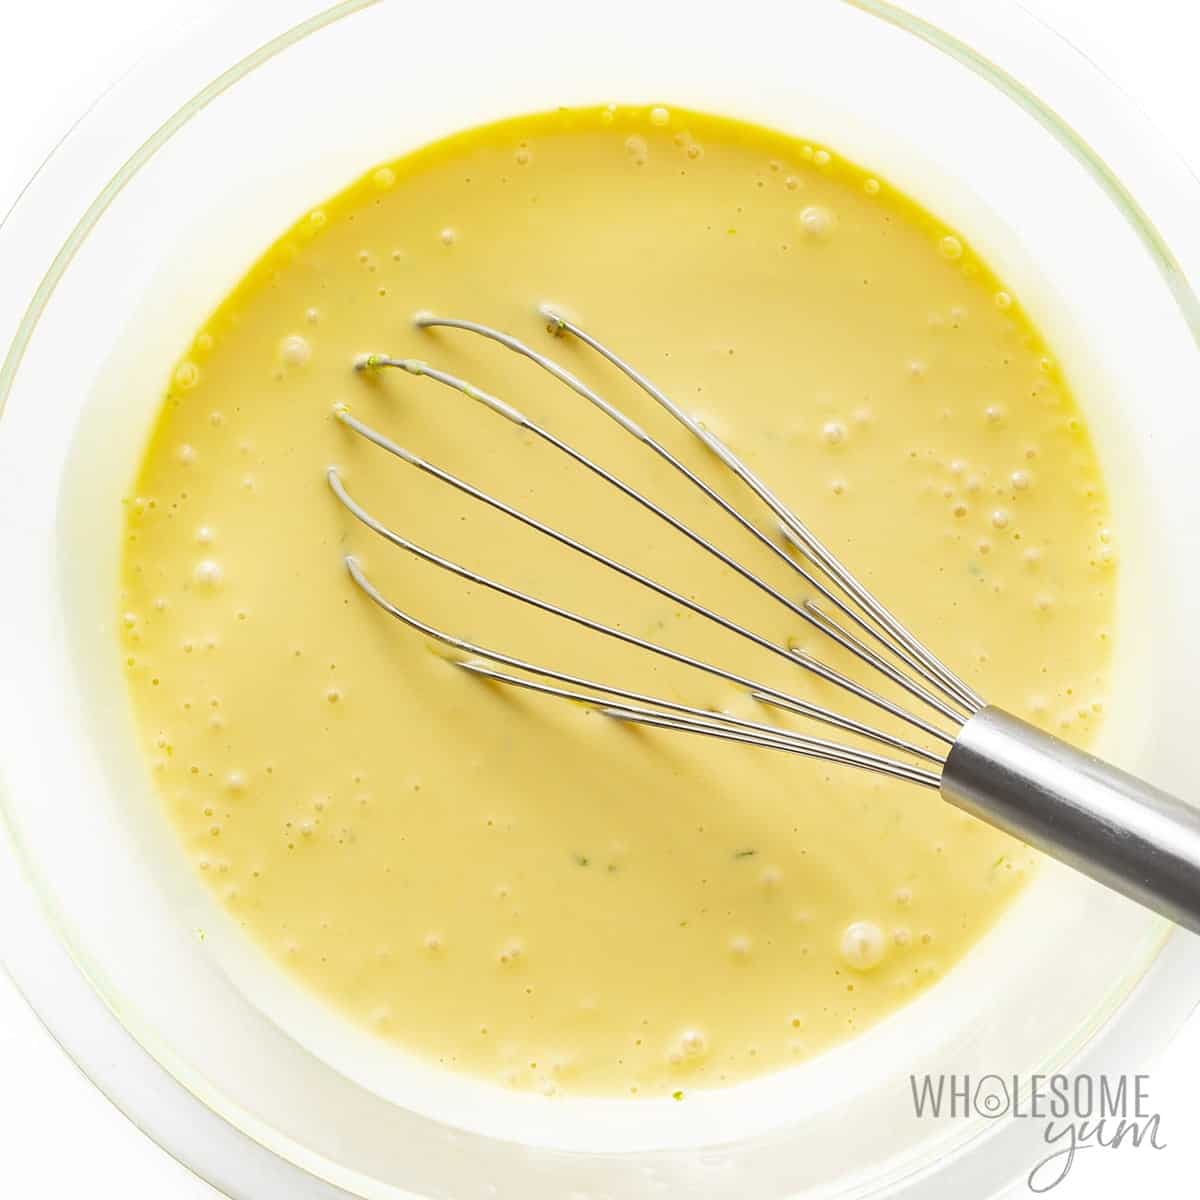 Sugar-free key lime pie filling in a bowl with whisk.